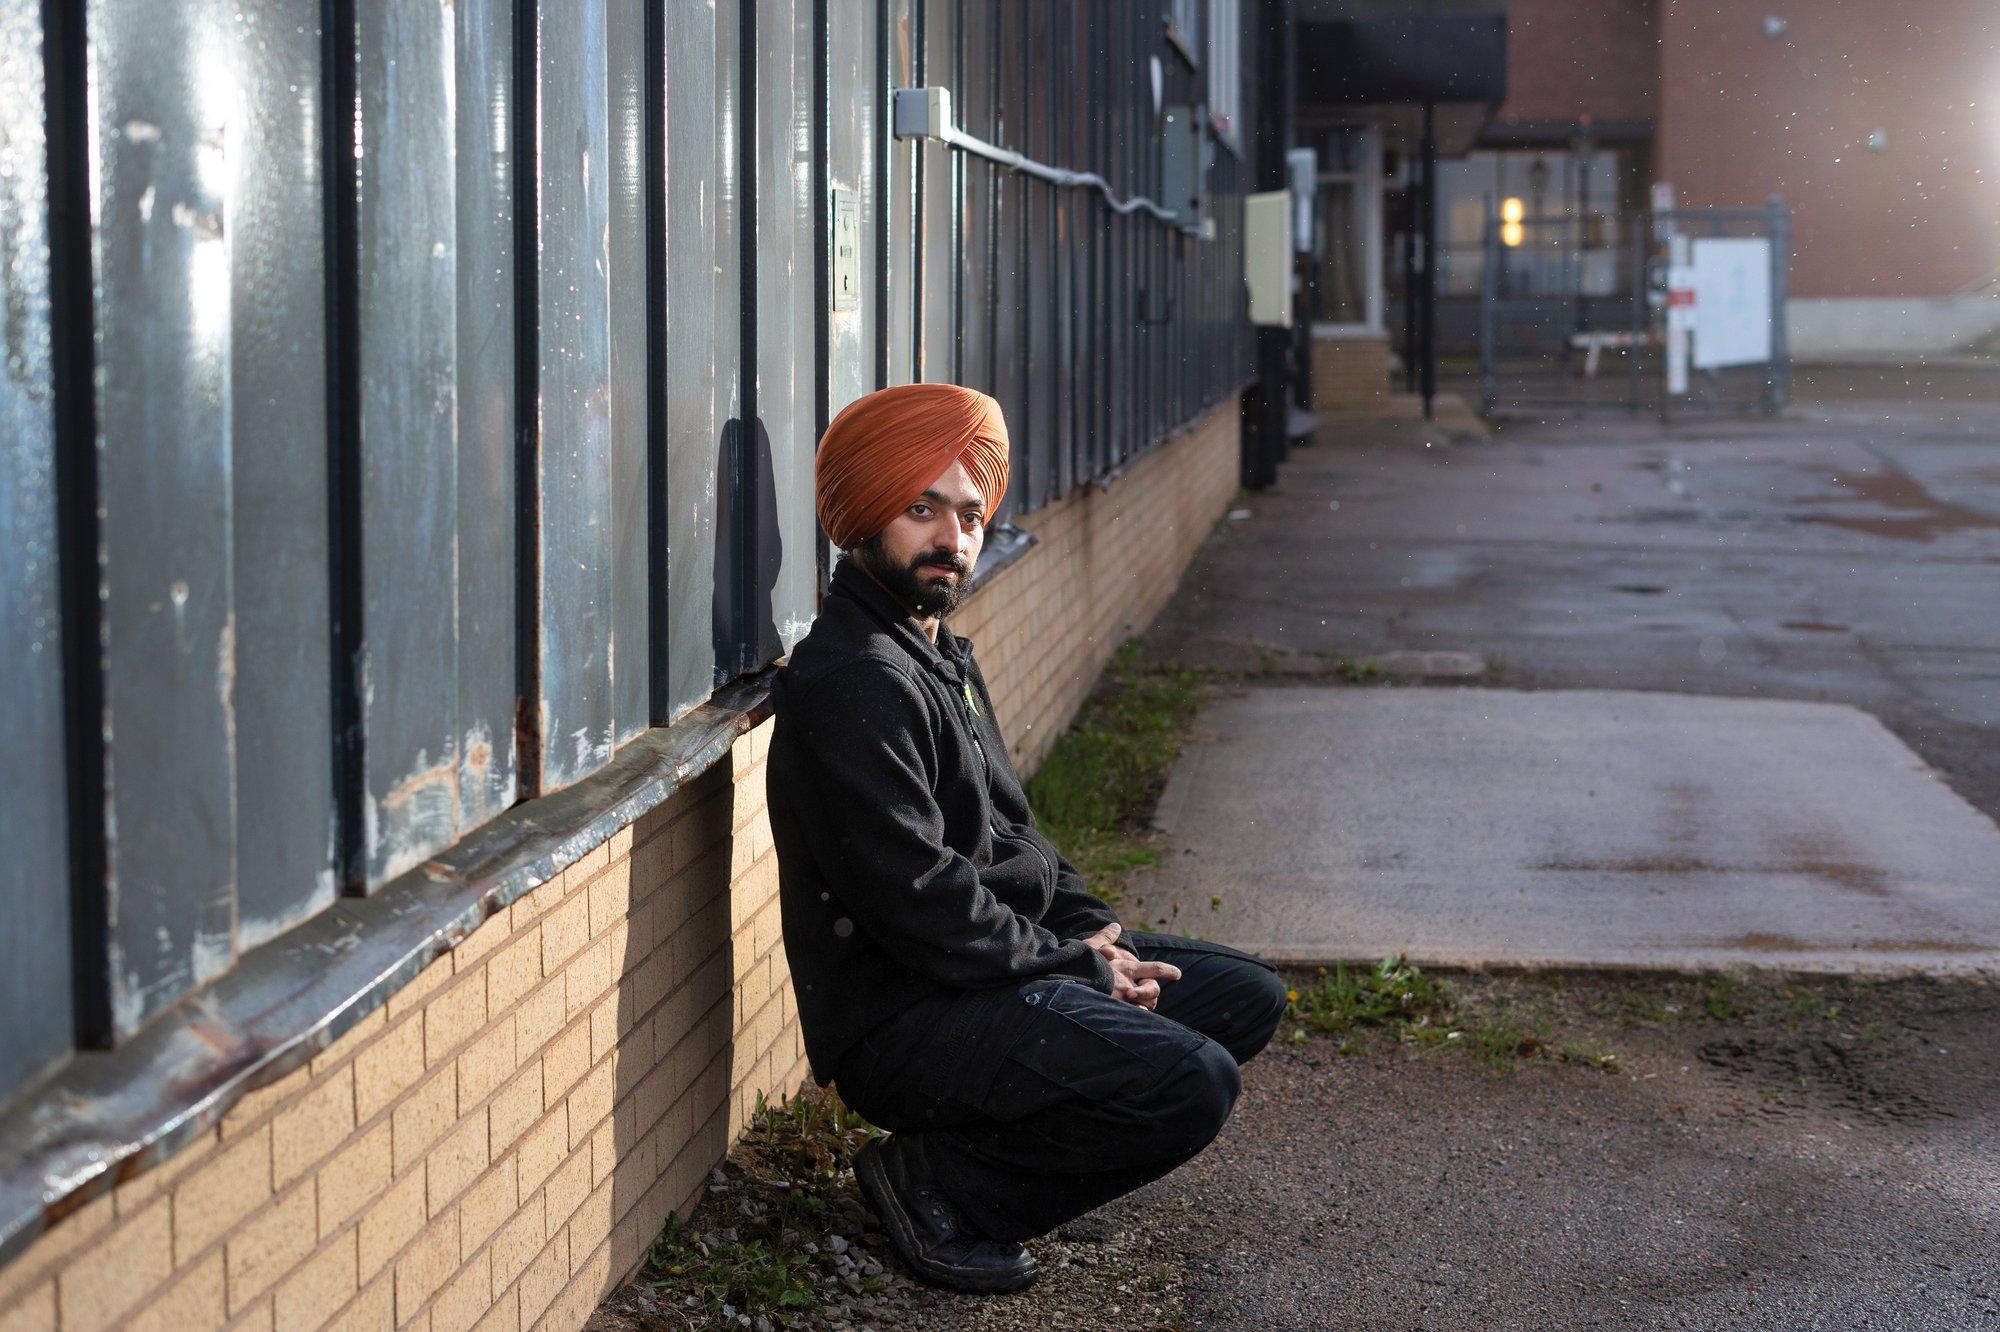 Tejbir Singh moved from Toronto to Charlottetown seeking a faster path to permanent residency through P.E.I's provincial nominee program. He wants to stay, but the skyrocketing cost of housing and uncertain job prospects weigh on him.